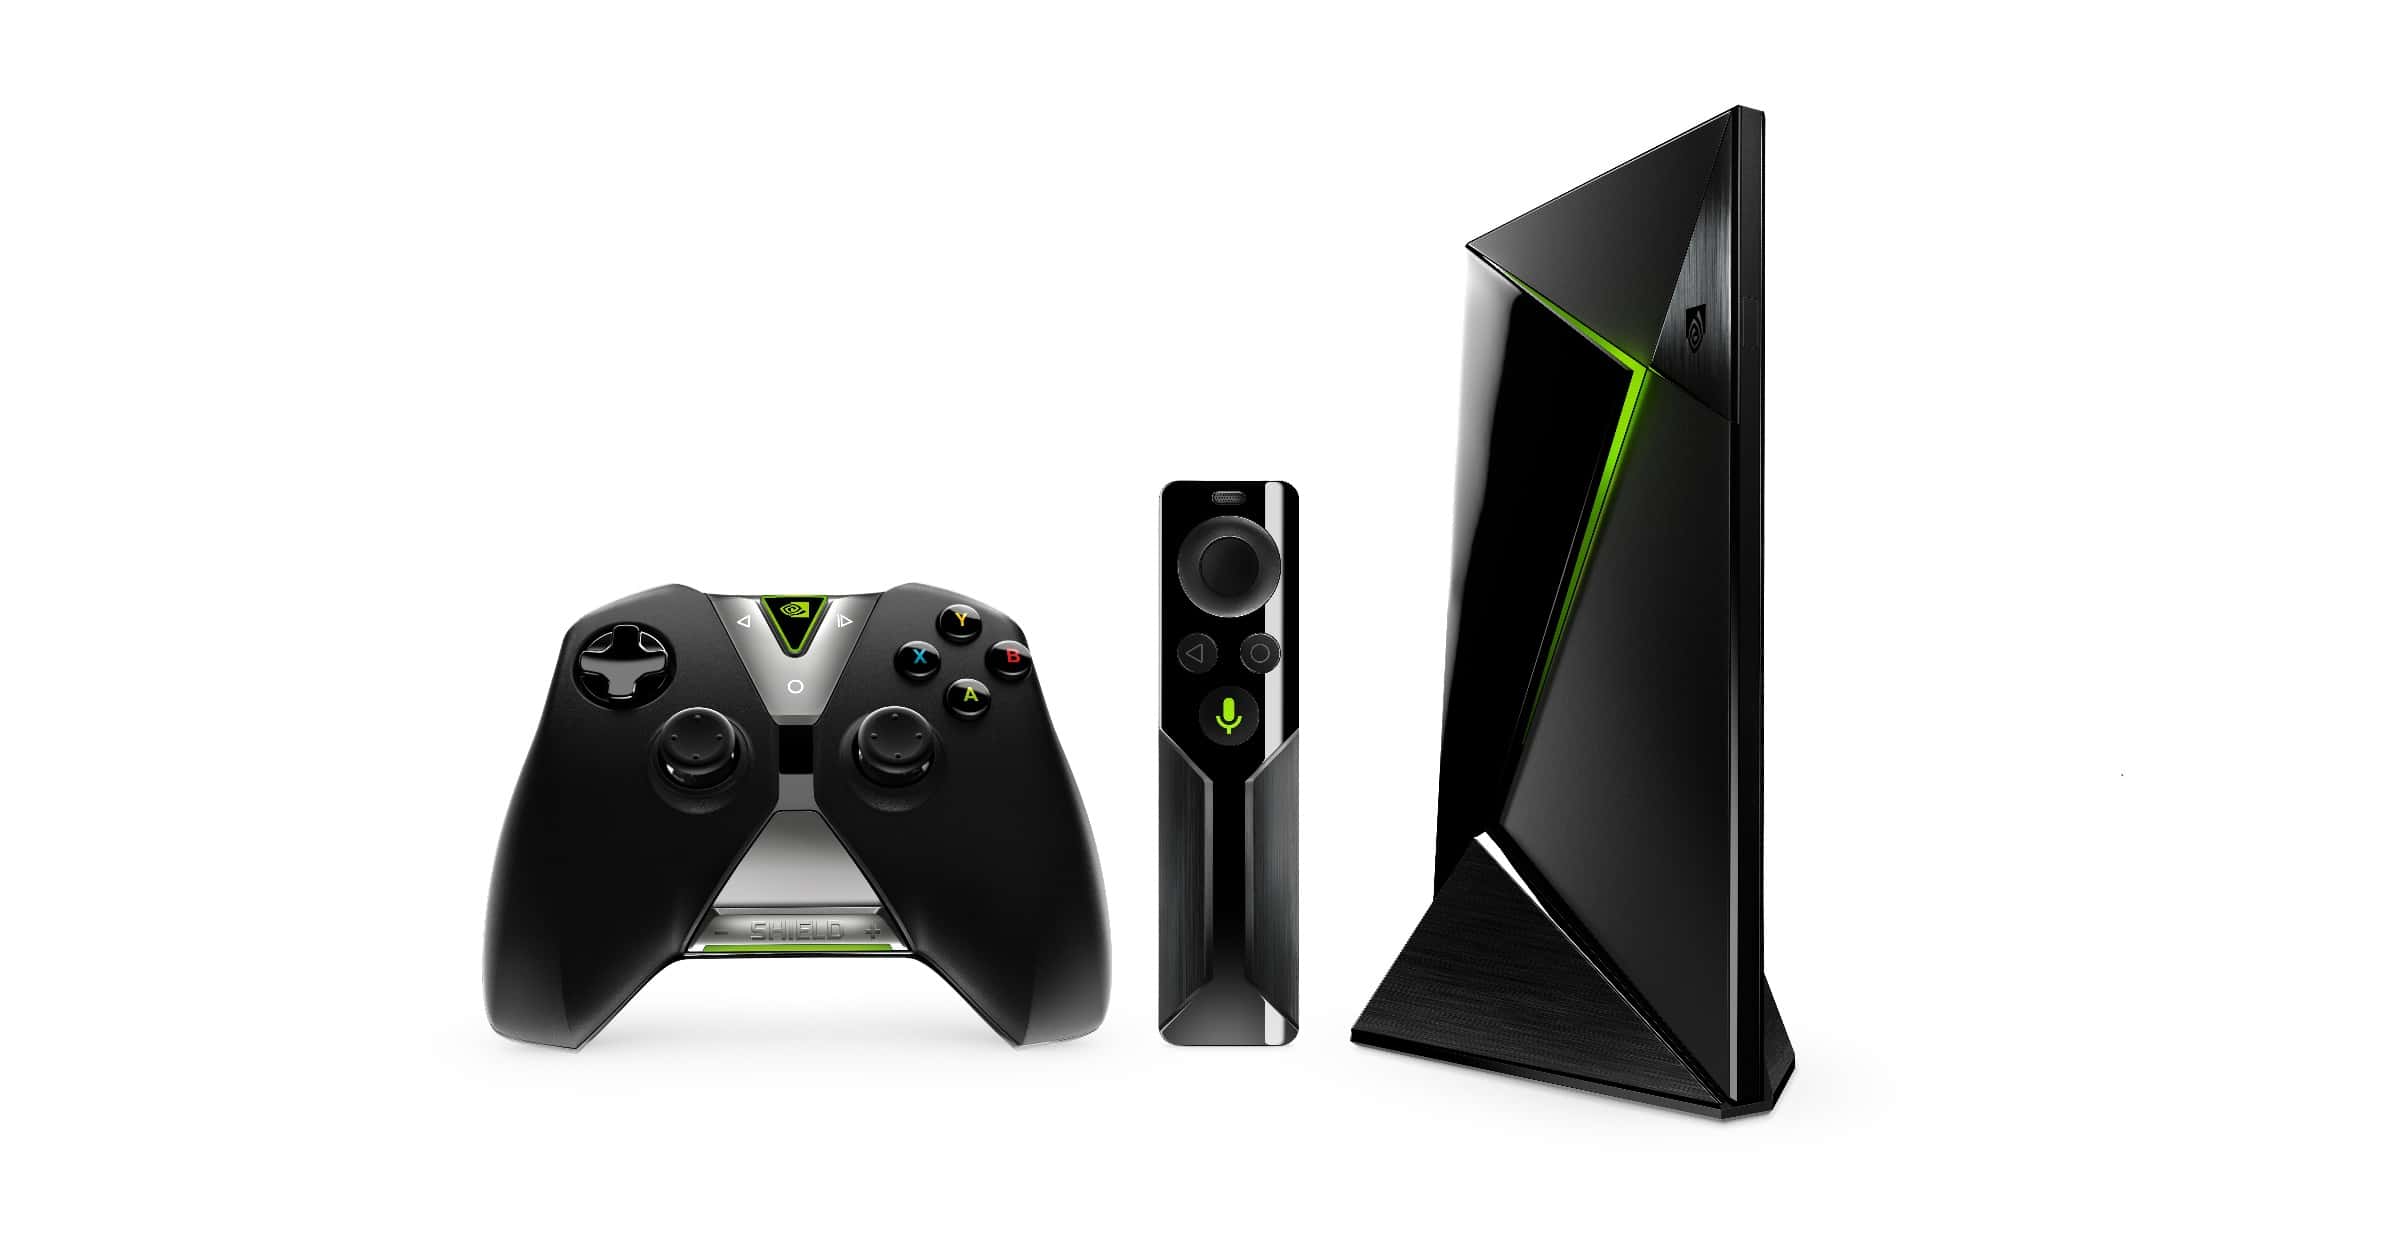 The Apple TV App Now Available on Nvidia SHIELD